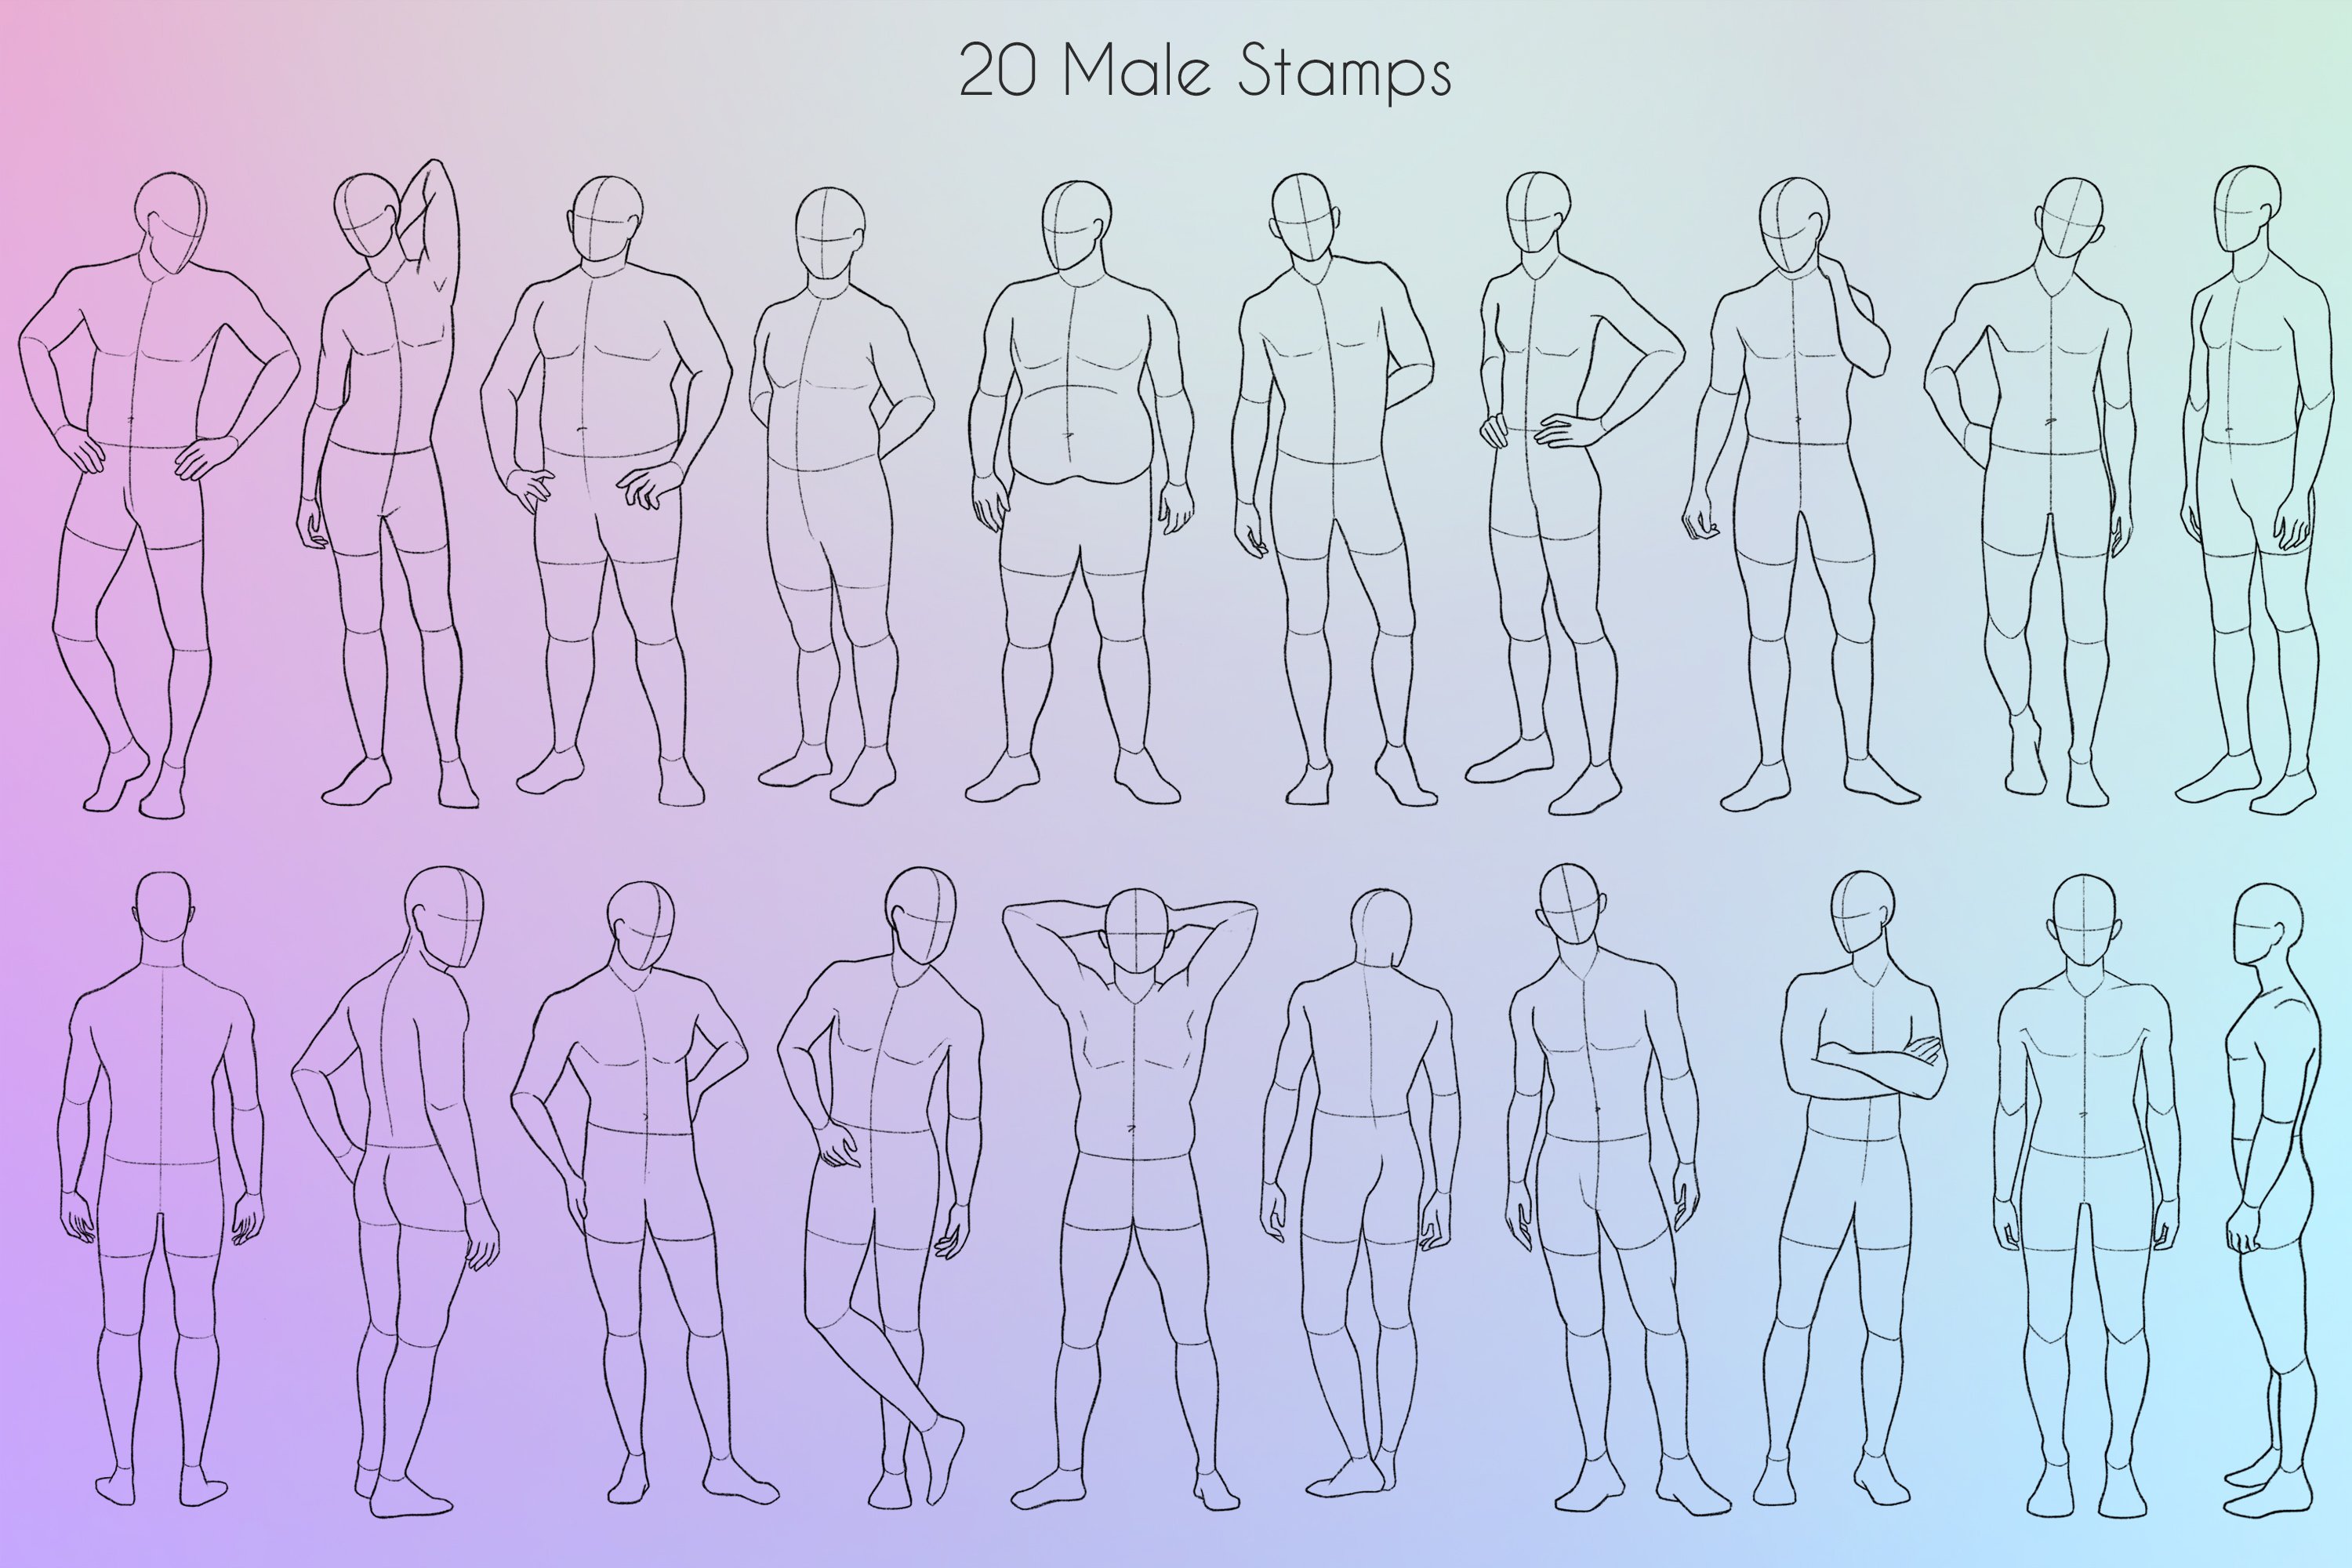 Male standing pose Images - Search Images on Everypixel